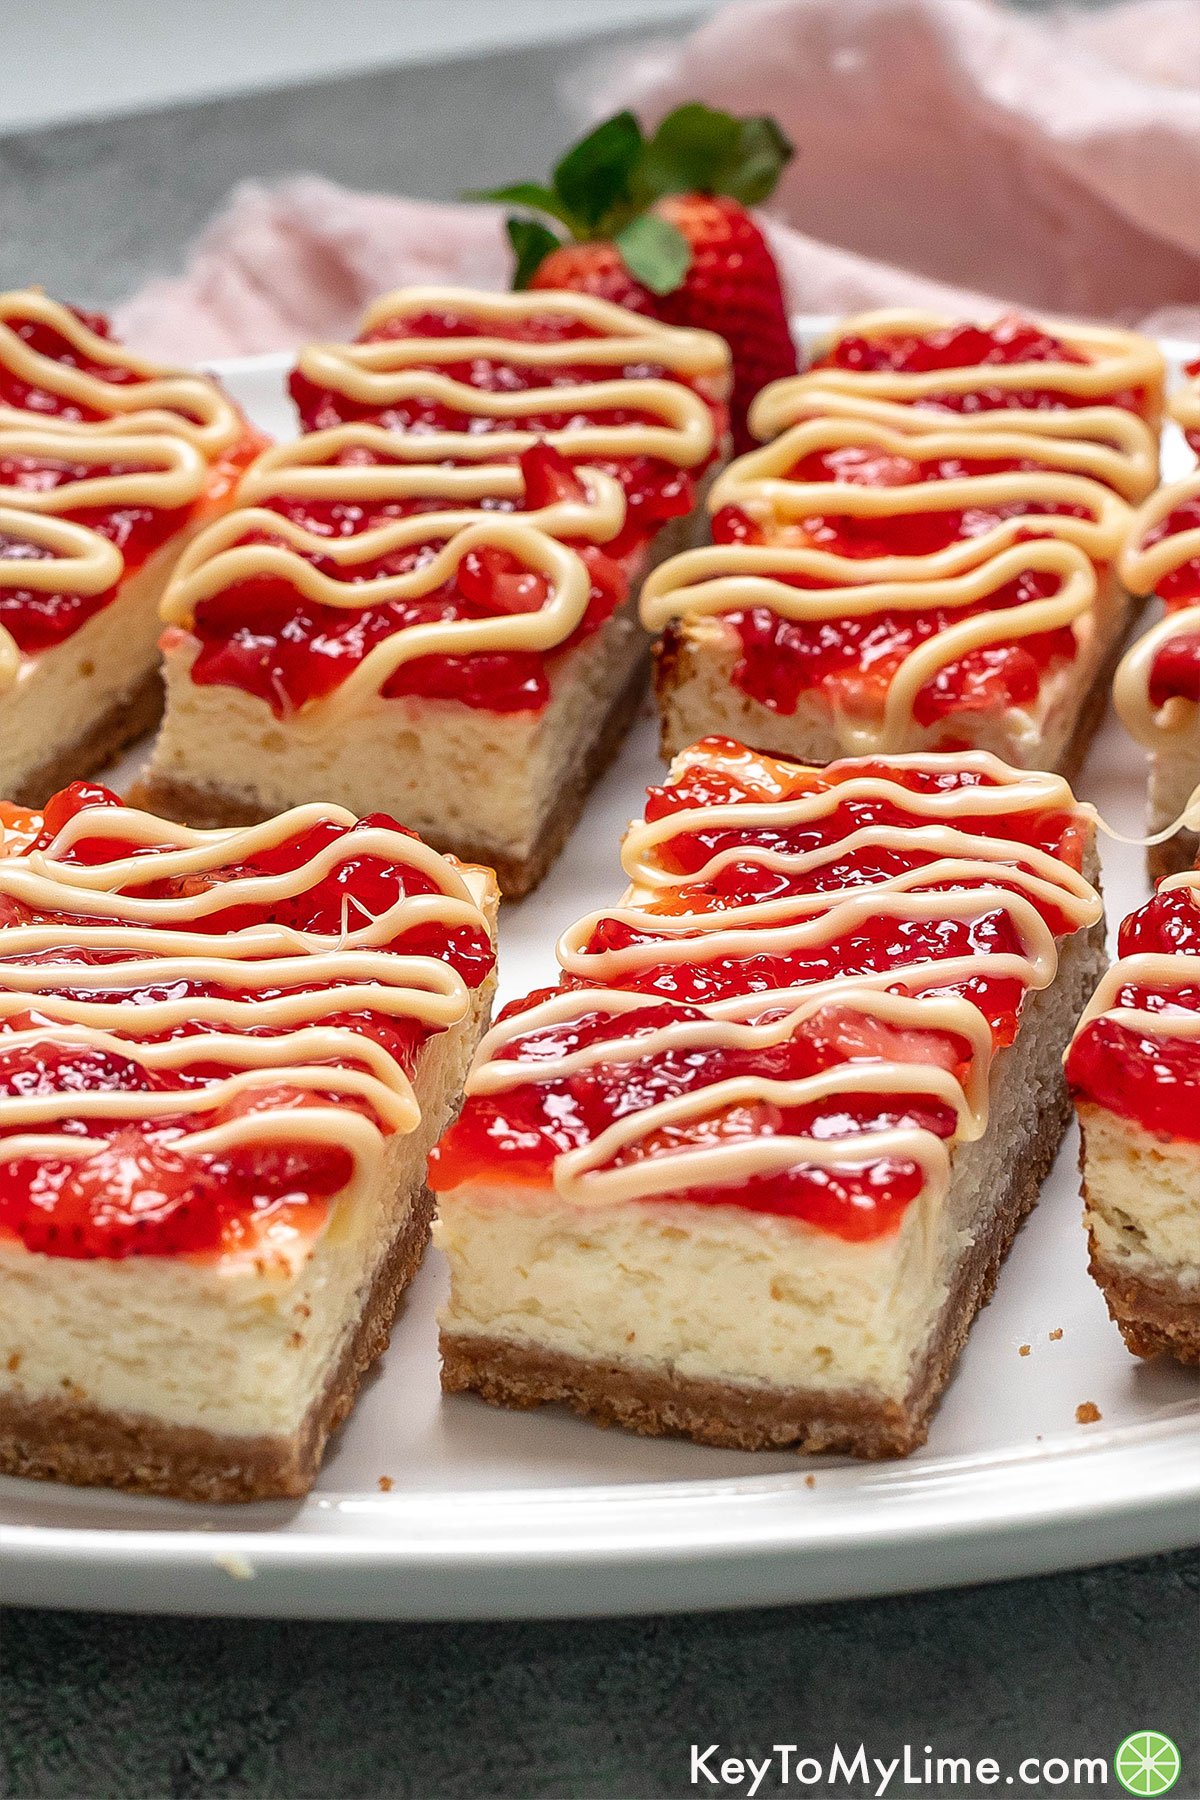 A side shot of creamy cheesecake bars with strawberries to the side.